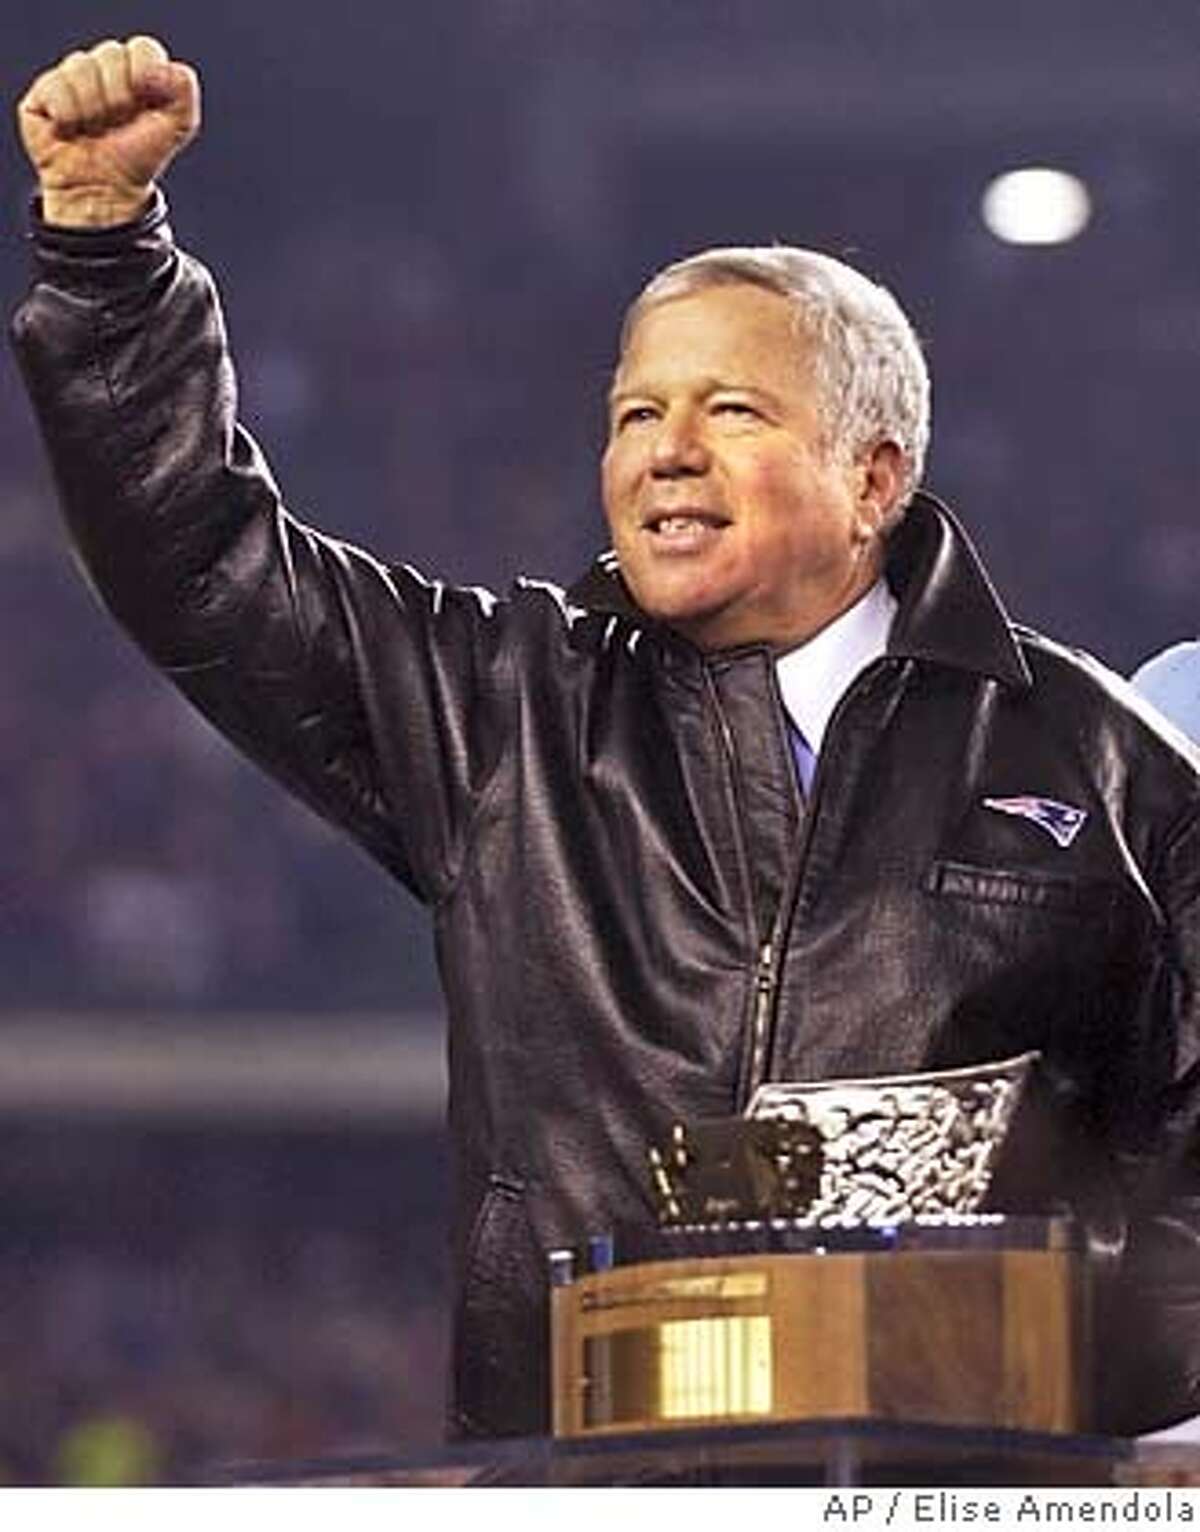 New England Patriots owner Robert Kraft throws a fist to the crowd with the Lamar Hunt Trophy in foreground after their 24-14 victory over the Indianapolis Colts for the at Gillette Stadium in Foxboro, Mass. Sunday, Jan. 18, 2004. (AP Photo/Elise Amendola)